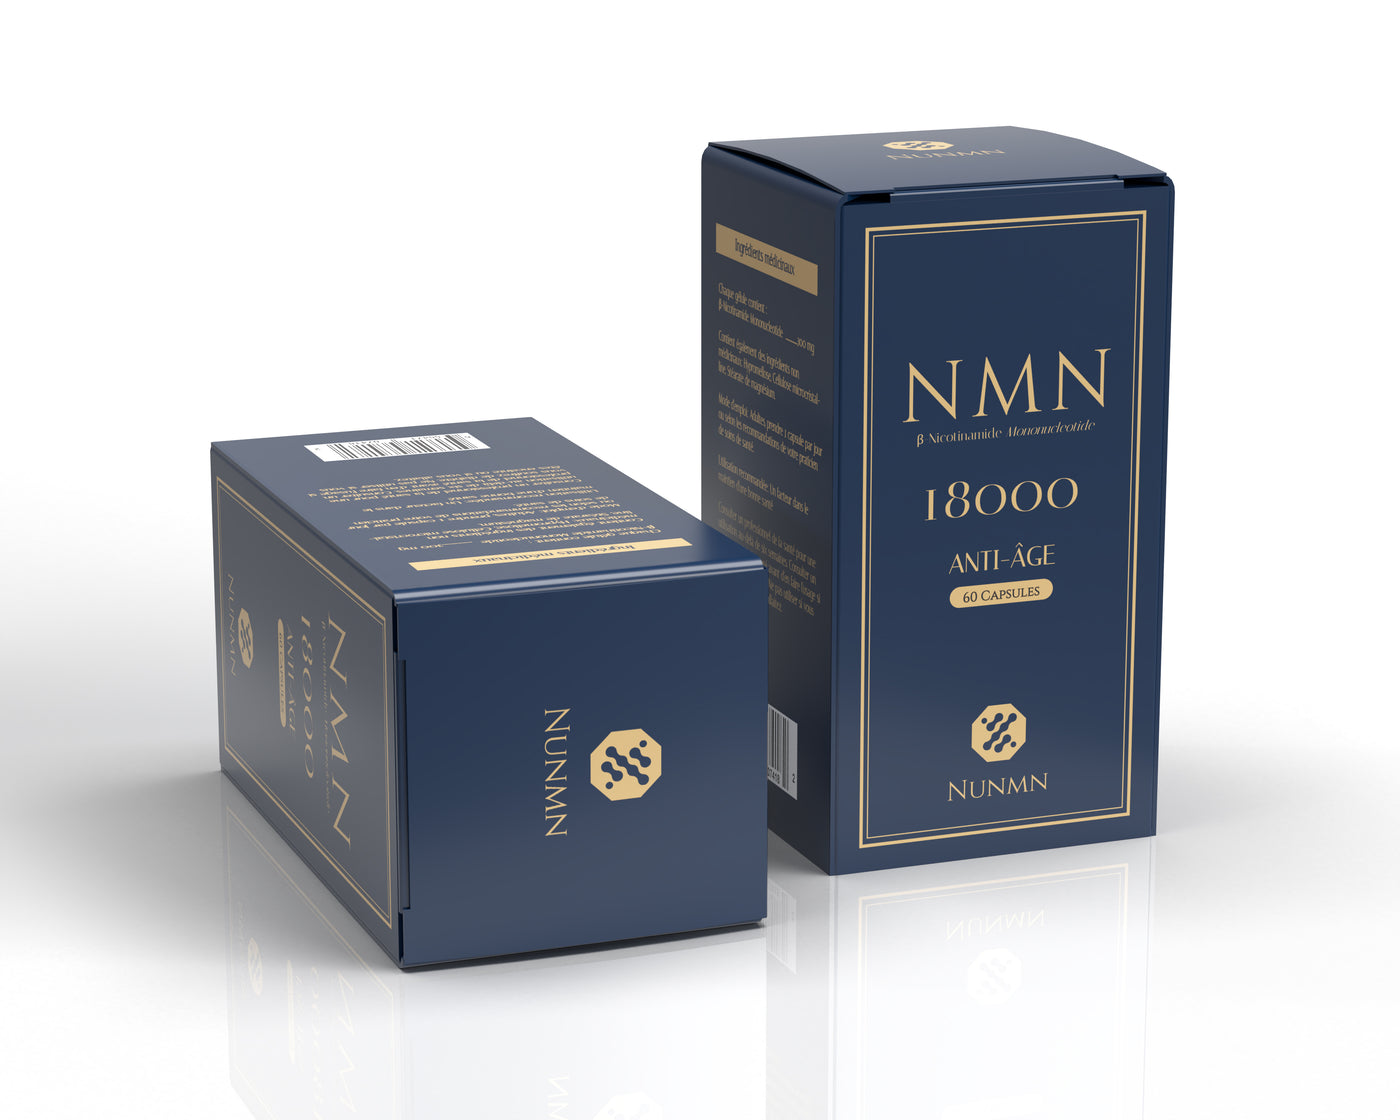 NMN Supplement 18000 NAD+ Booster Nicotinamide Mononucleotide Energy Booster Metabolism & Repair DNA. Vitality, Healthy Aging 99.5% Purity x 6 bottles - NUNMN